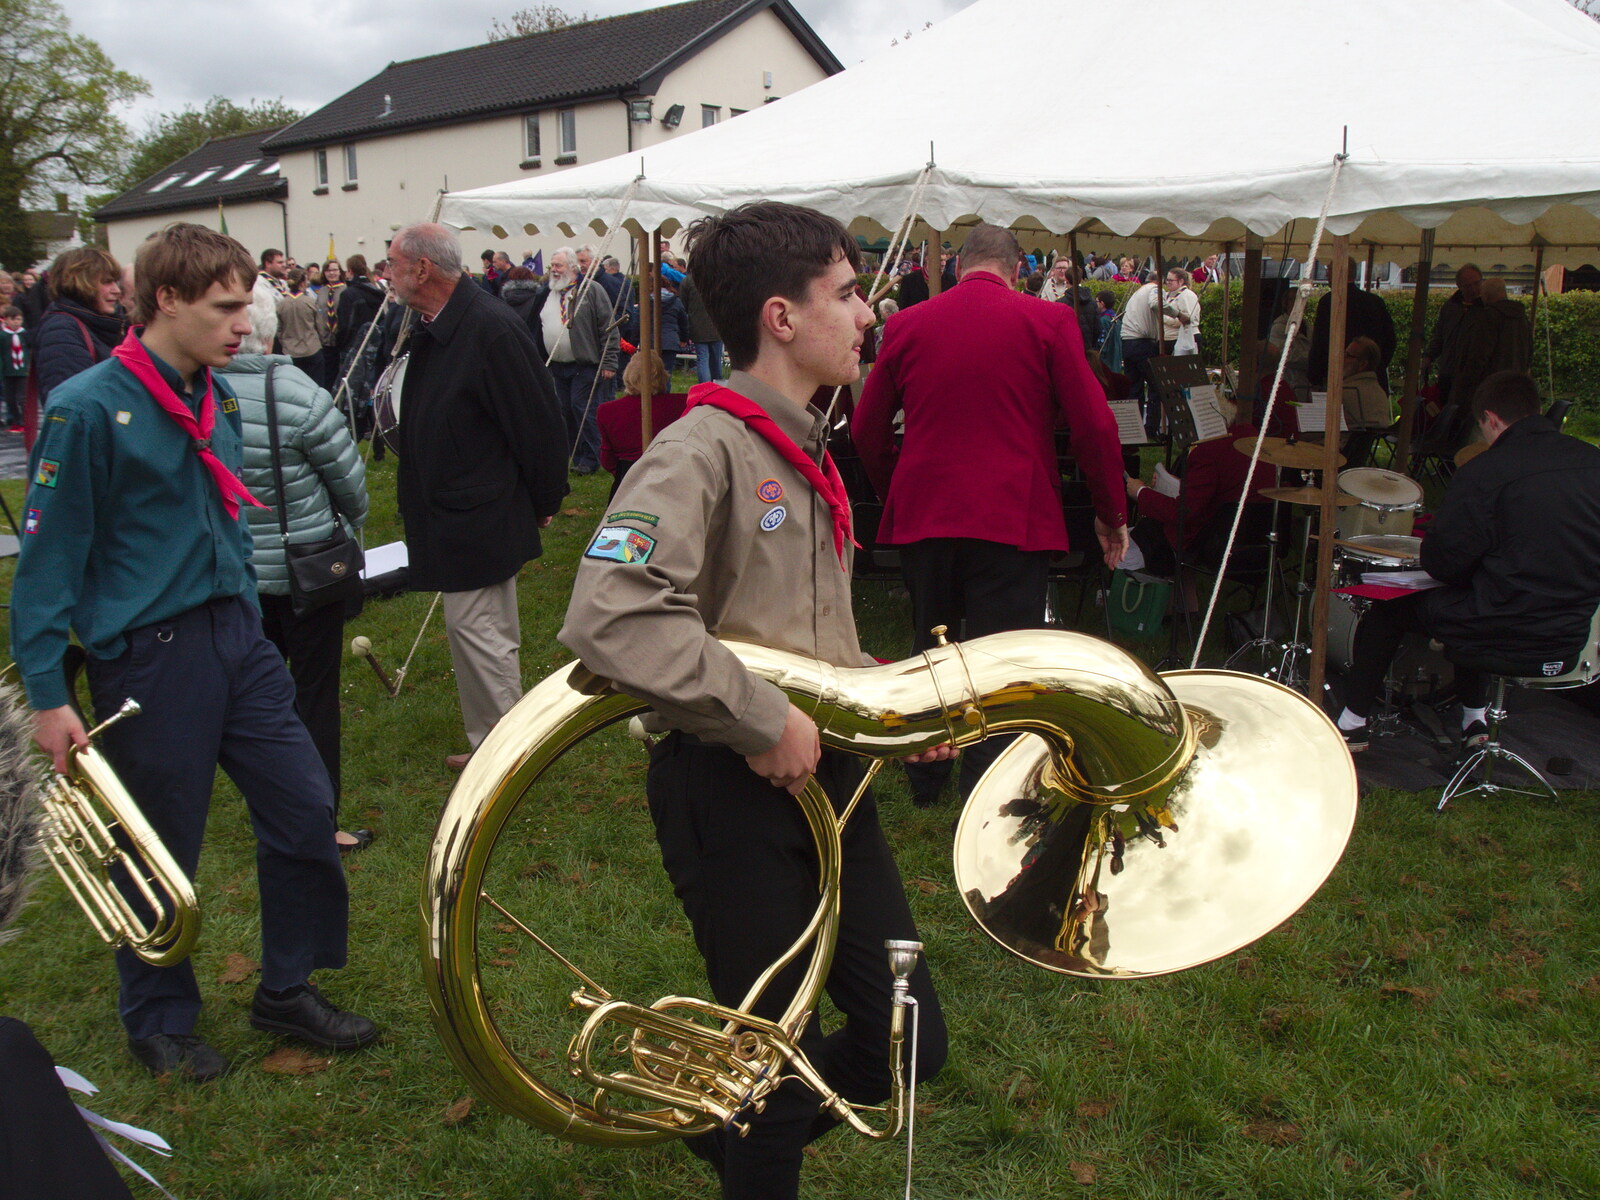 An actual sousaphone from A St. George's Day Parade, Dickleburgh, Norfolk - 28th April 2019